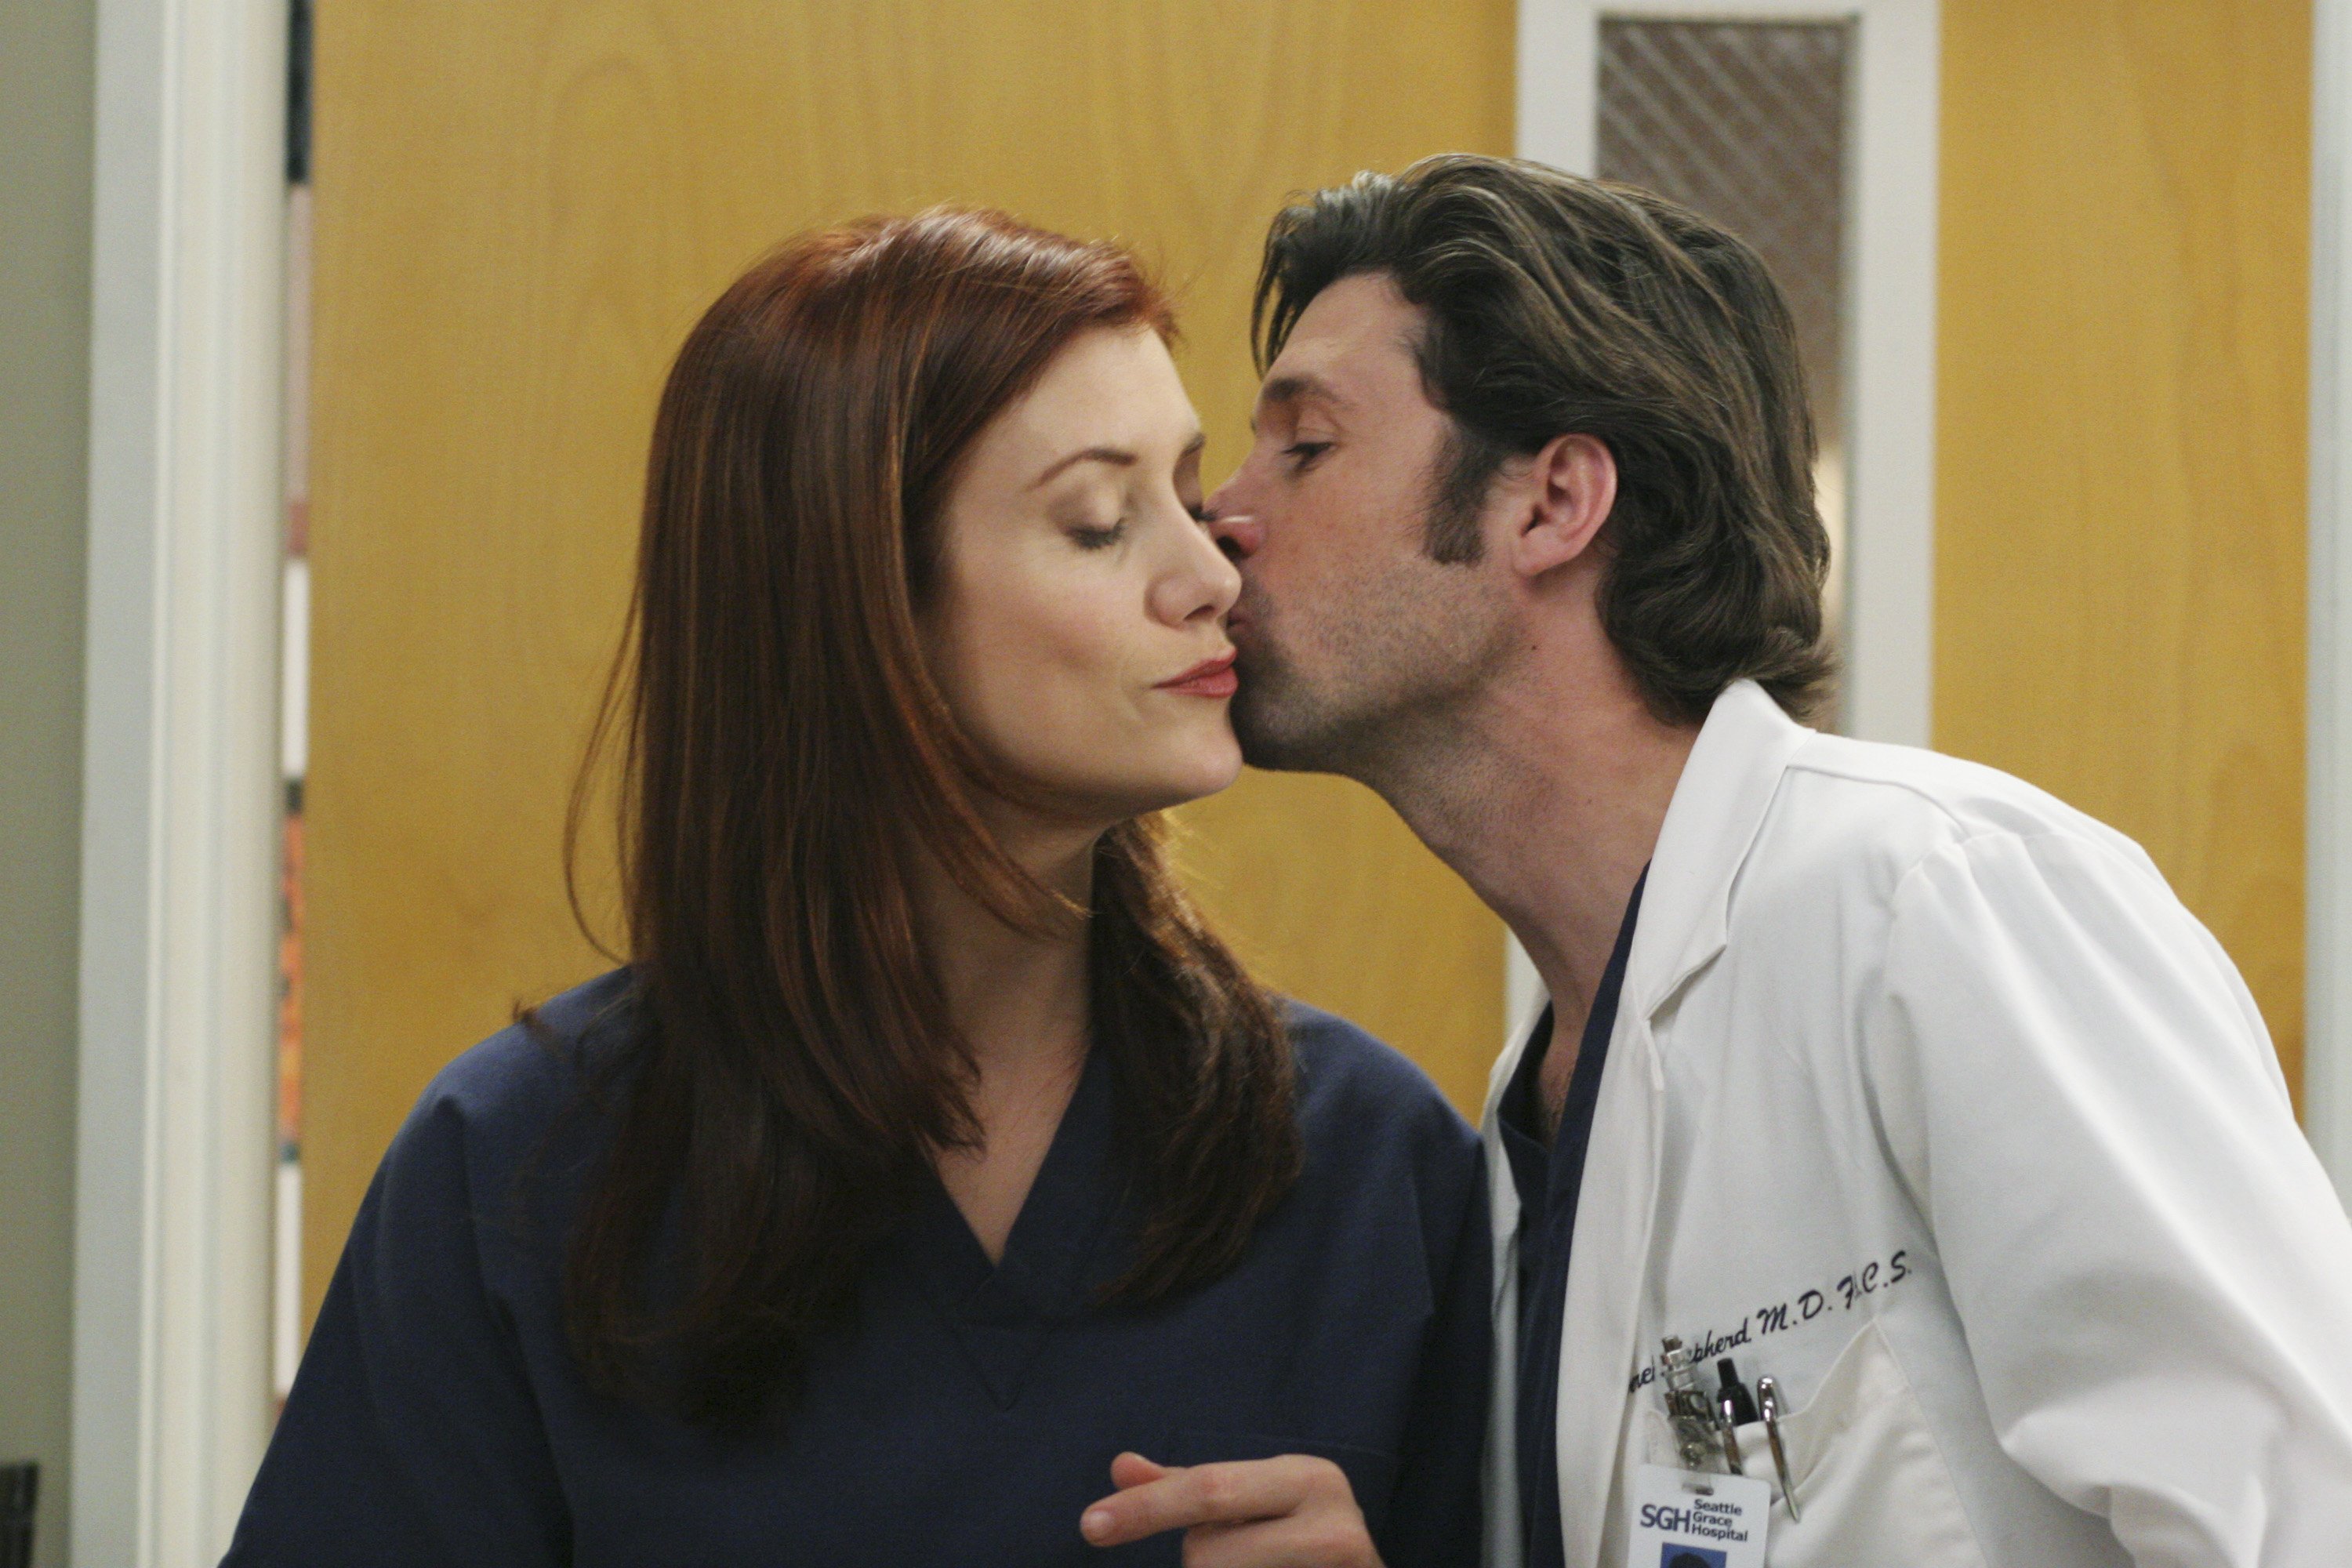 A snapshot of Kate Walsh and Patrick Dempsey from "Grey's Anatomy." | Source: Getty Images